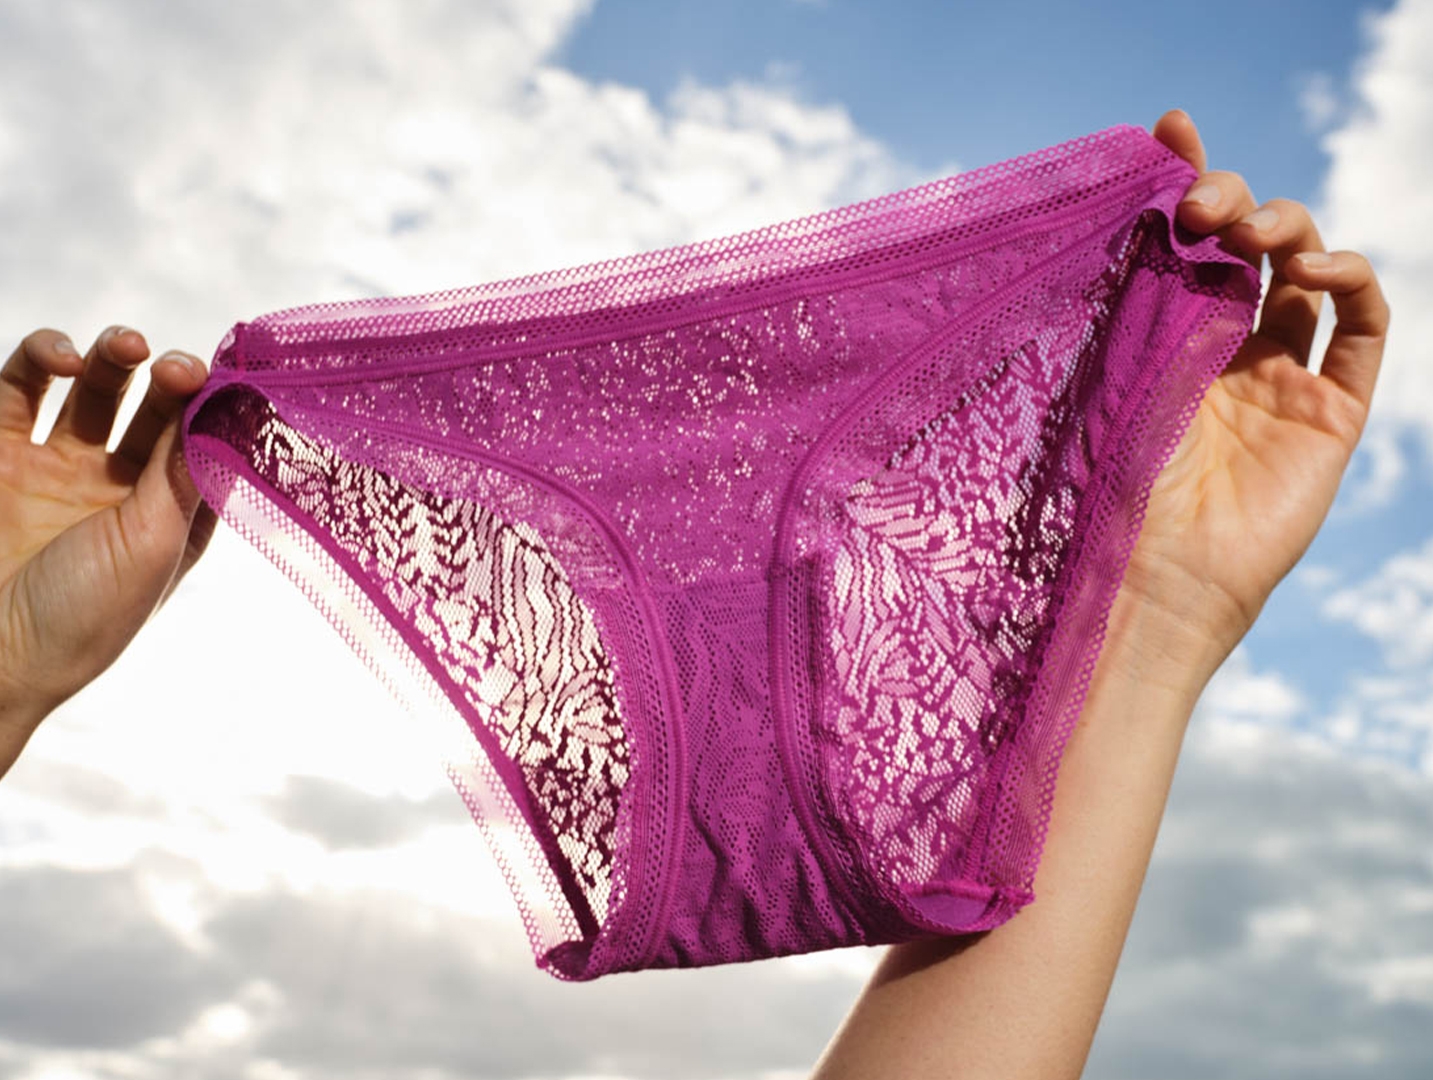 Sunny Lingerie's Women Panty Give The Best Comfort